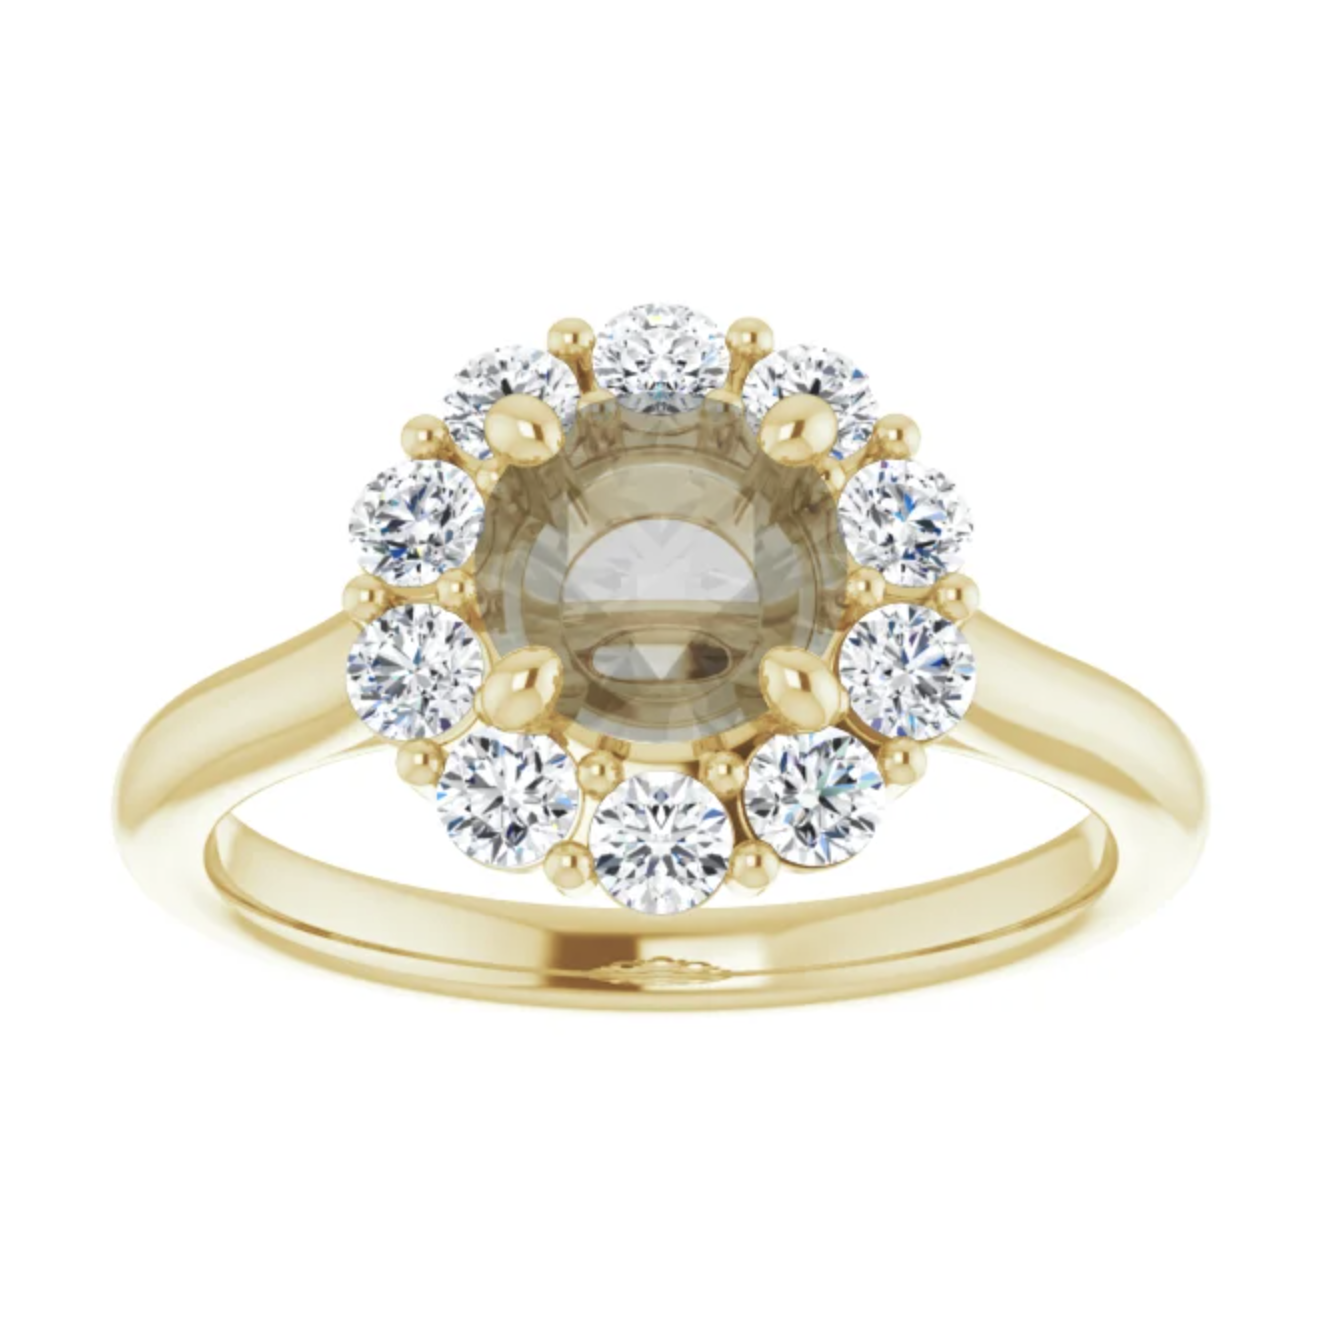 Magnolia Setting - Midwinter Co. Alternative Bridal Rings and Modern Fine Jewelry